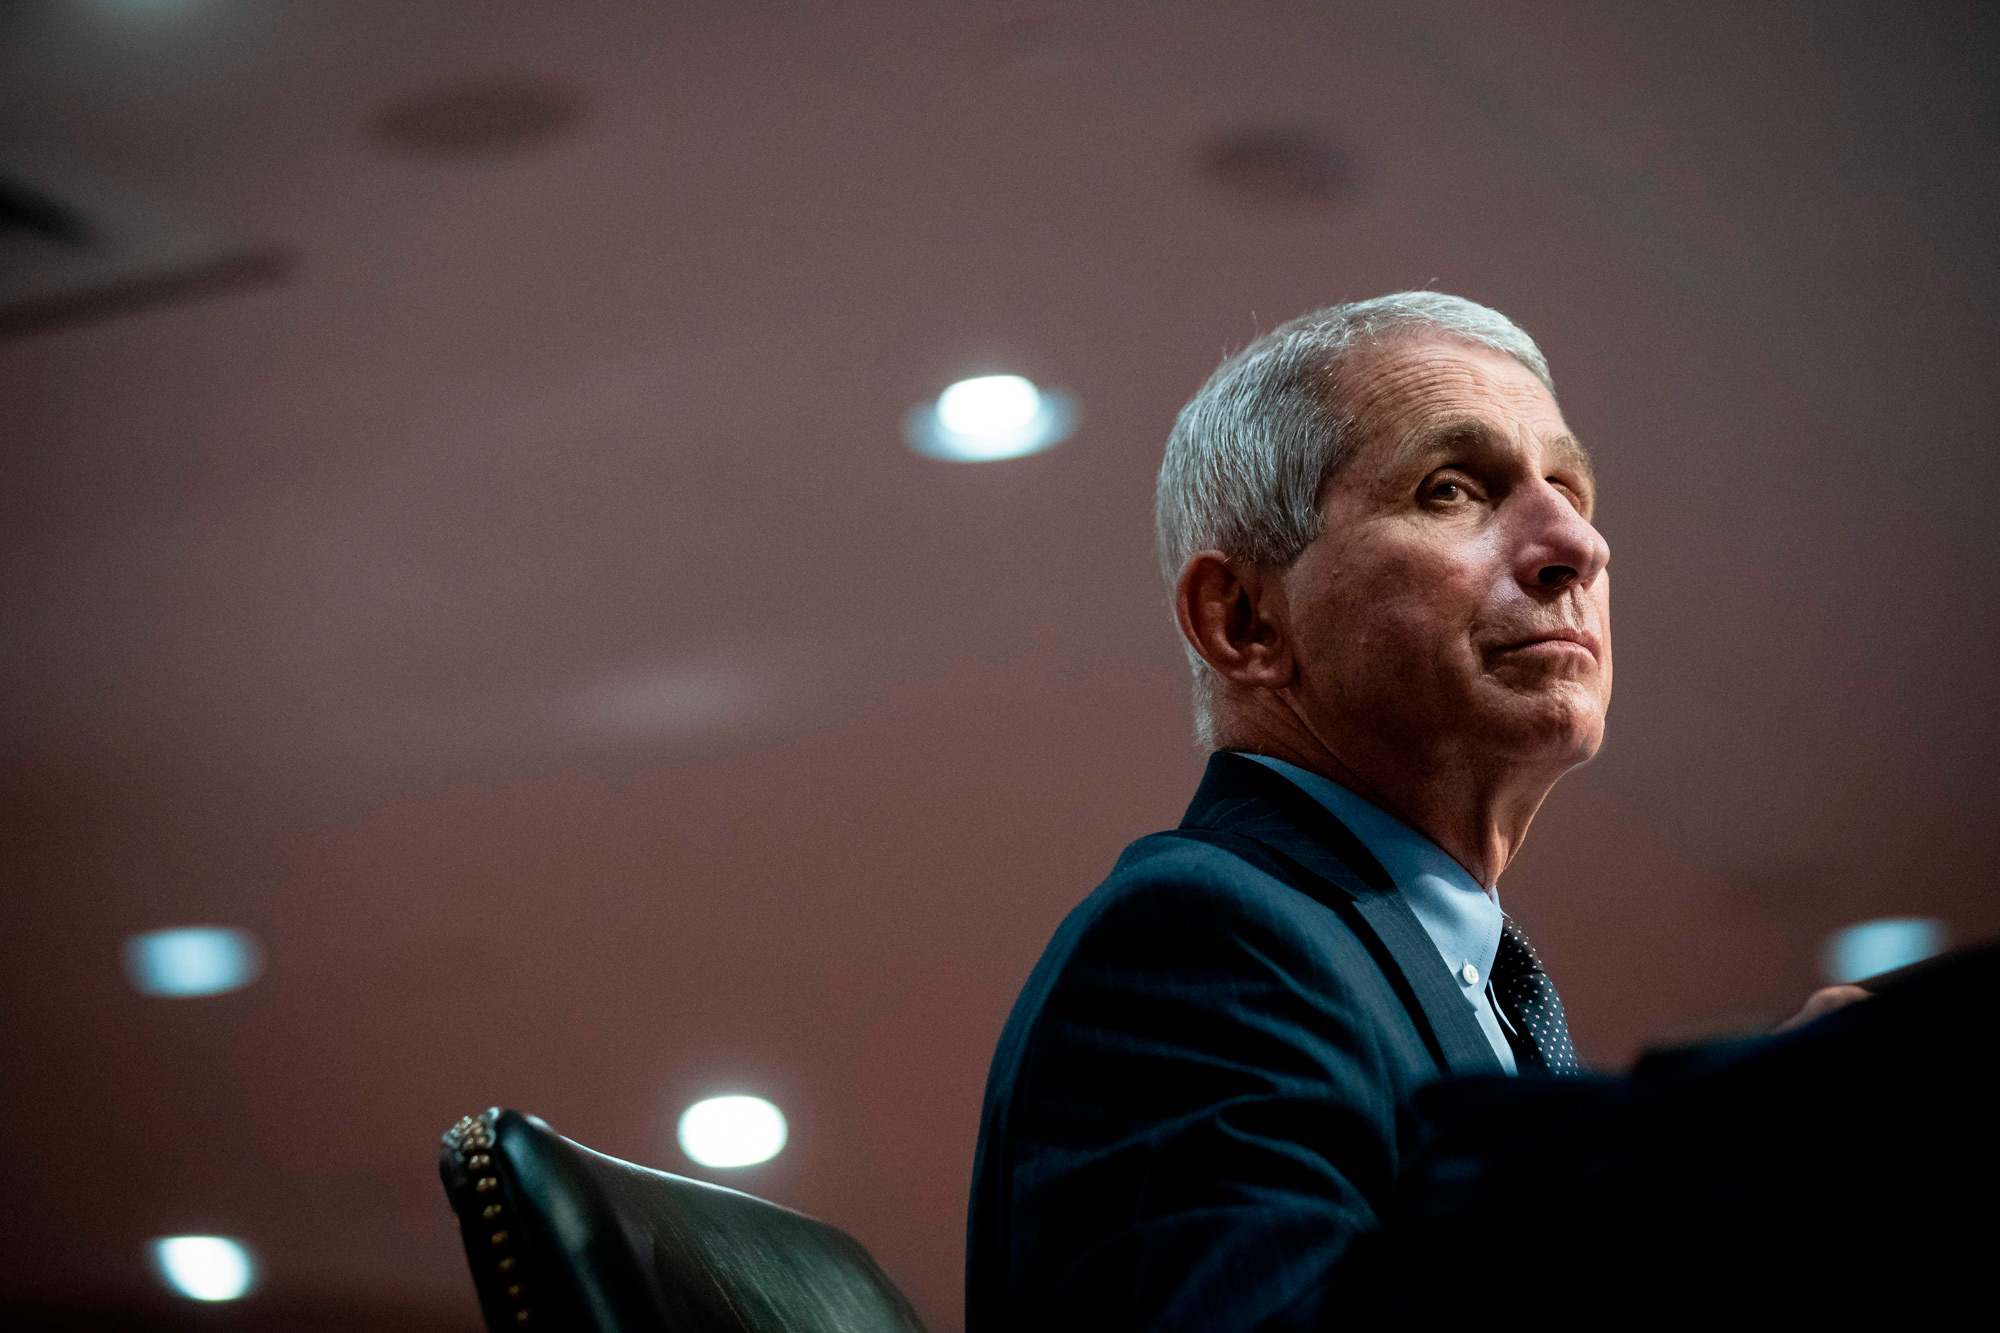 Anthony Fauci, director of the National Institute of Allergy and Infectious Diseases, listens during a Senate Health, Education, Labor and Pensions Committee hearing in Washington, DC, on June 30.